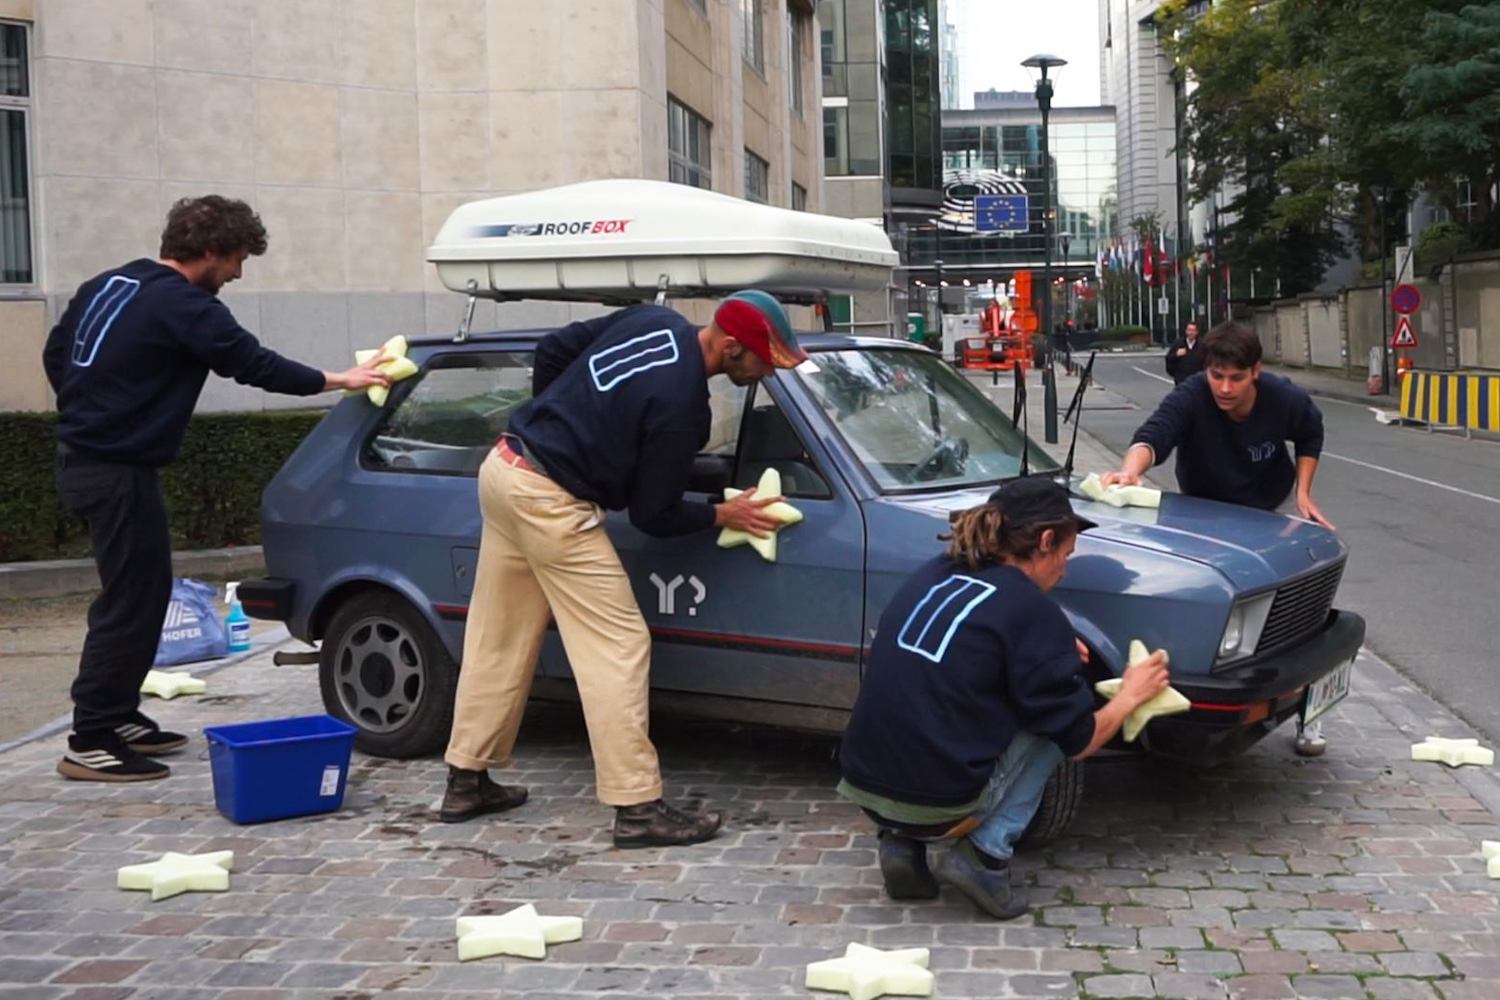 The team take part in an art intervention in Brussels.  Image: Y? Project